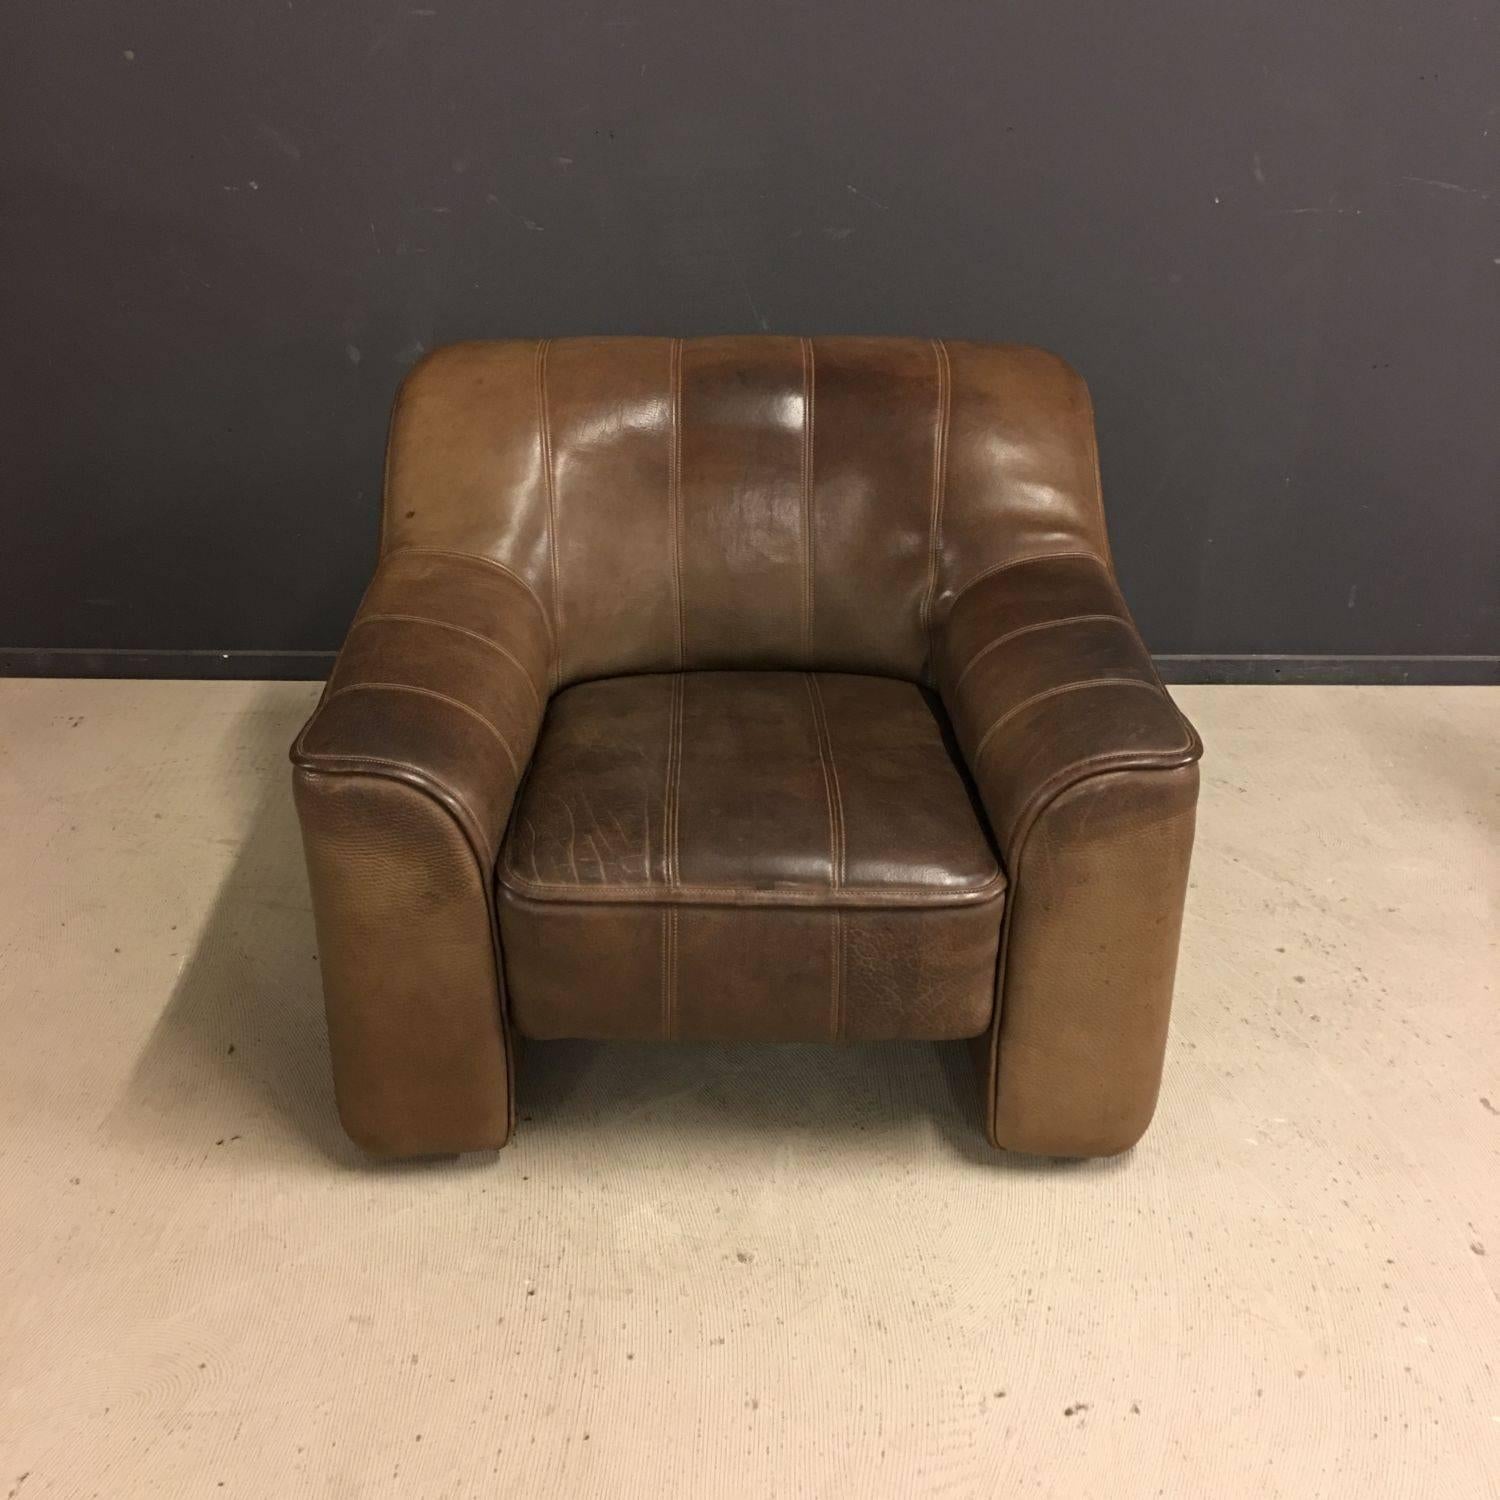 This De Sede DS44 set, is made in Switzerland during the 1970s. Made in thick, dark brown, buffalo leather, with nice patina. It features a three-seat sofa and a lounge armchair. DS44 type seating’s by De Sede have an extendable seating surface with